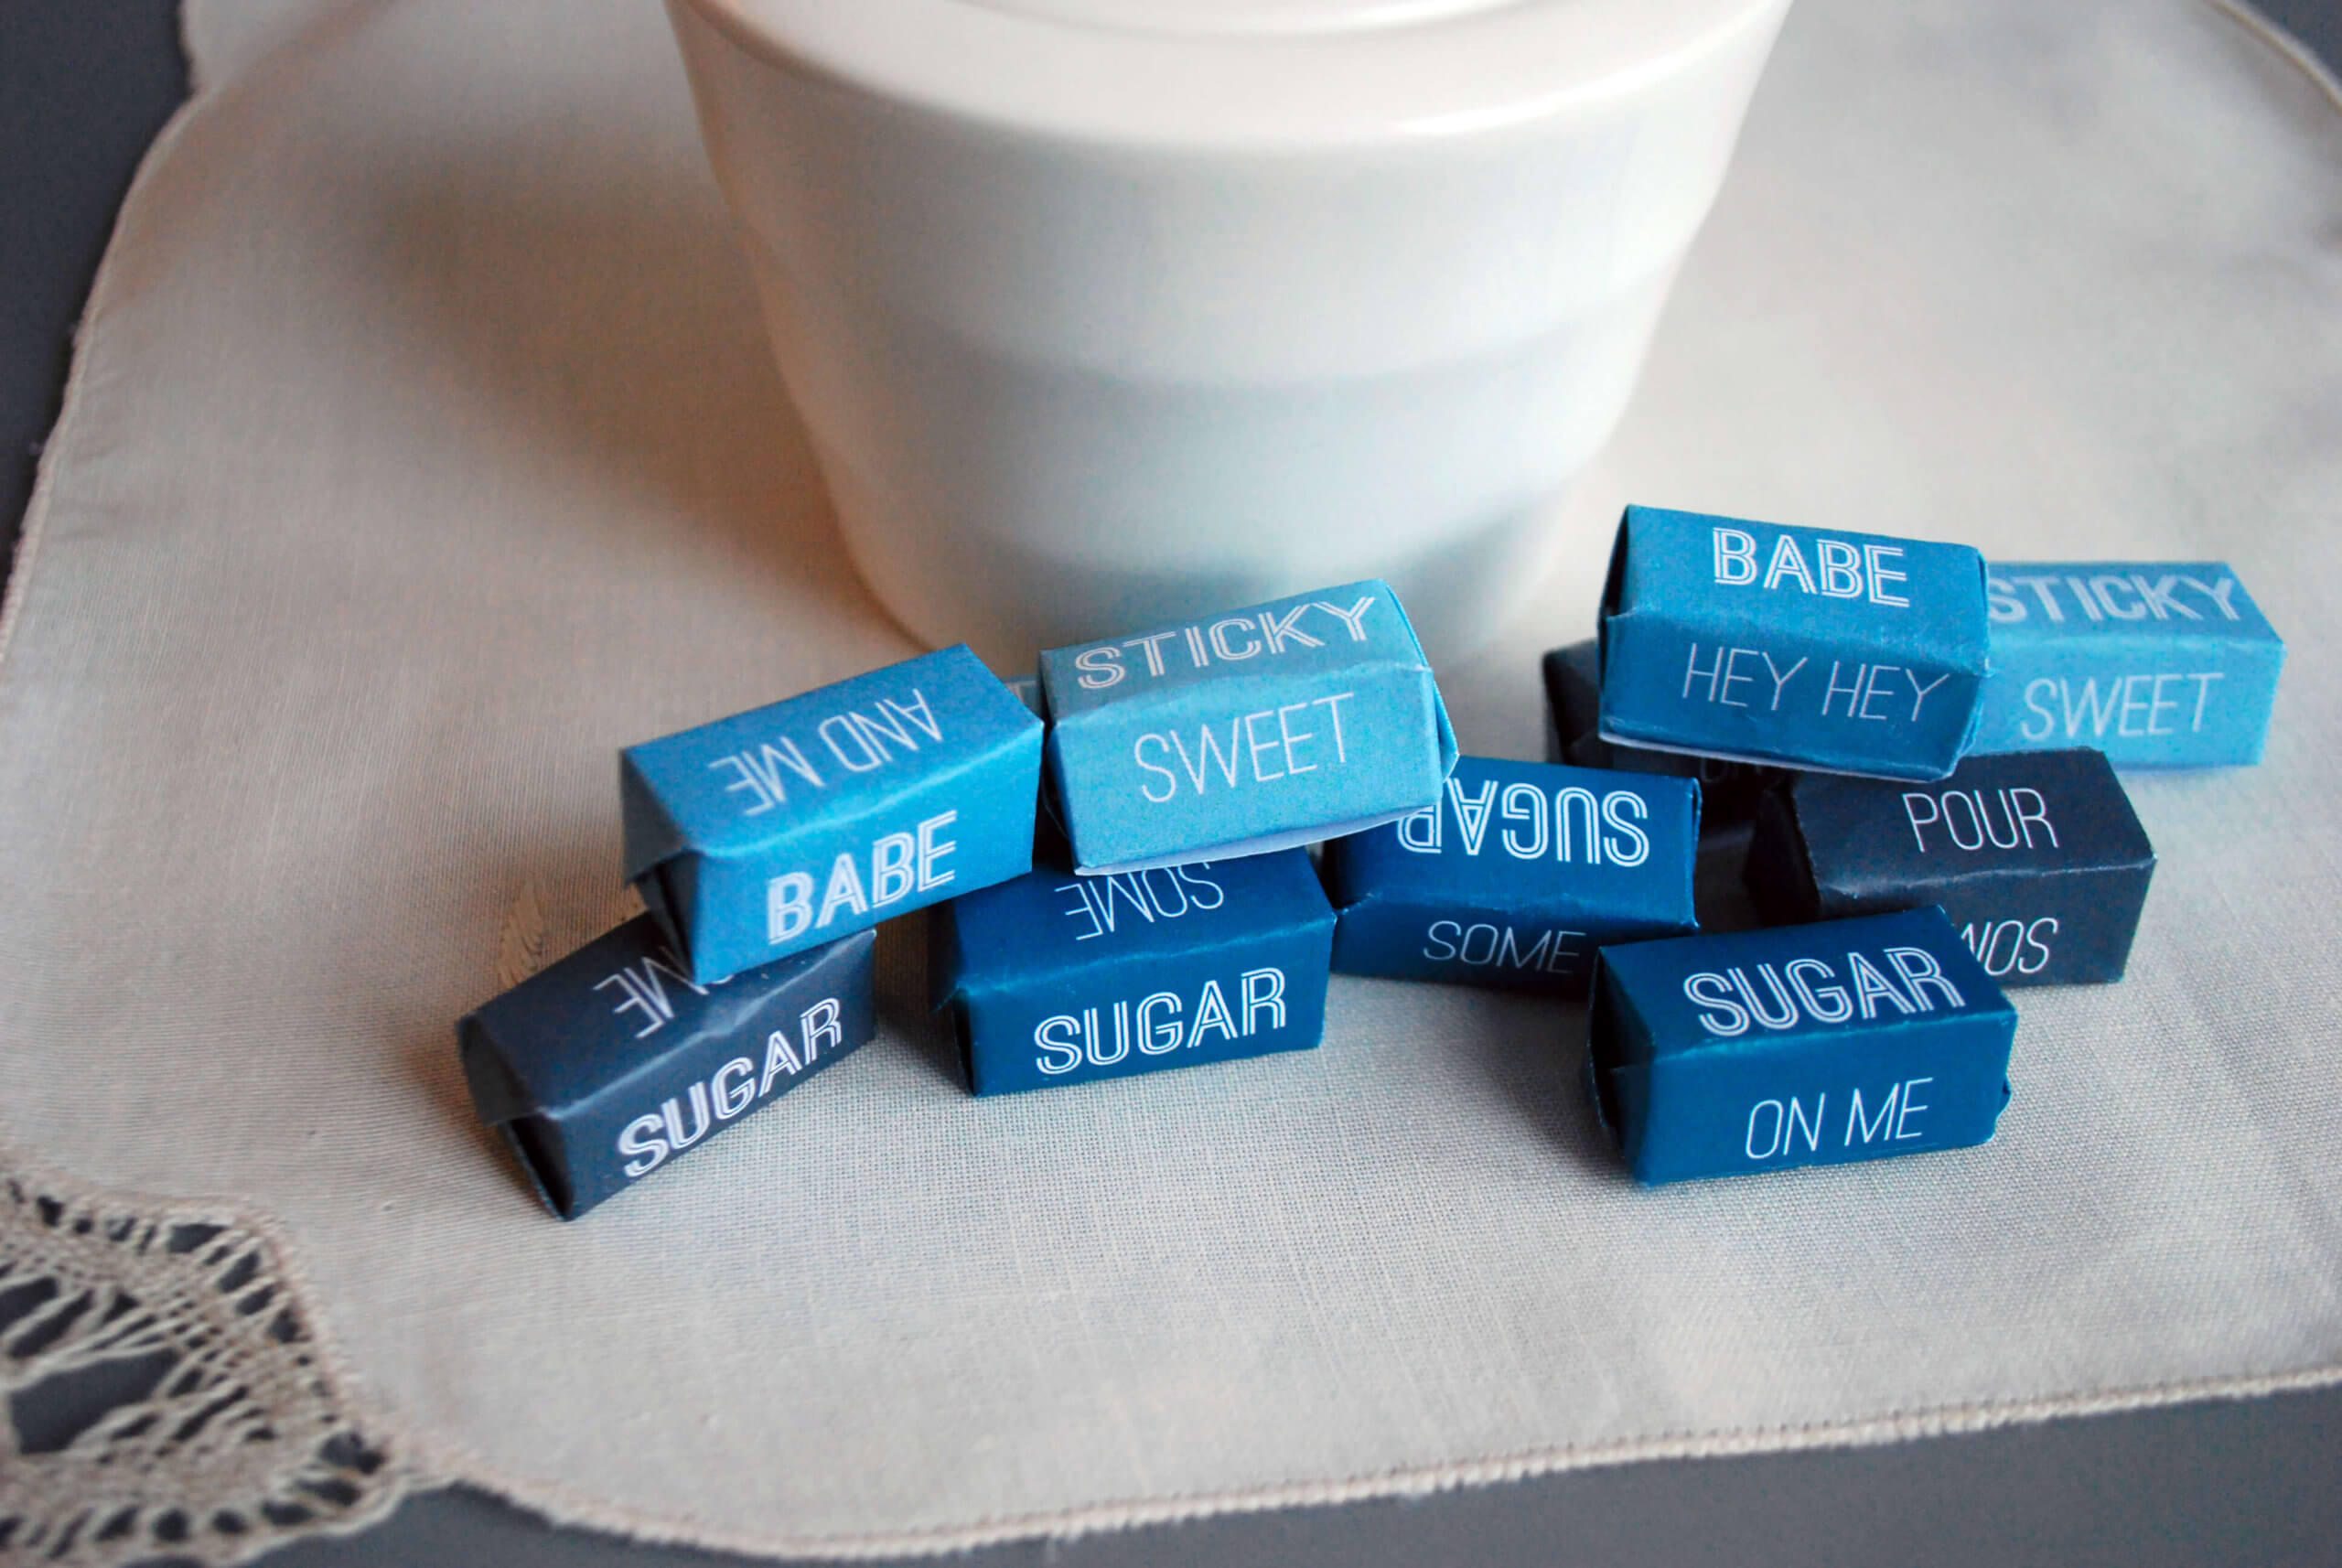 Hot and lovely sugar. Coffee Cube Sugar.